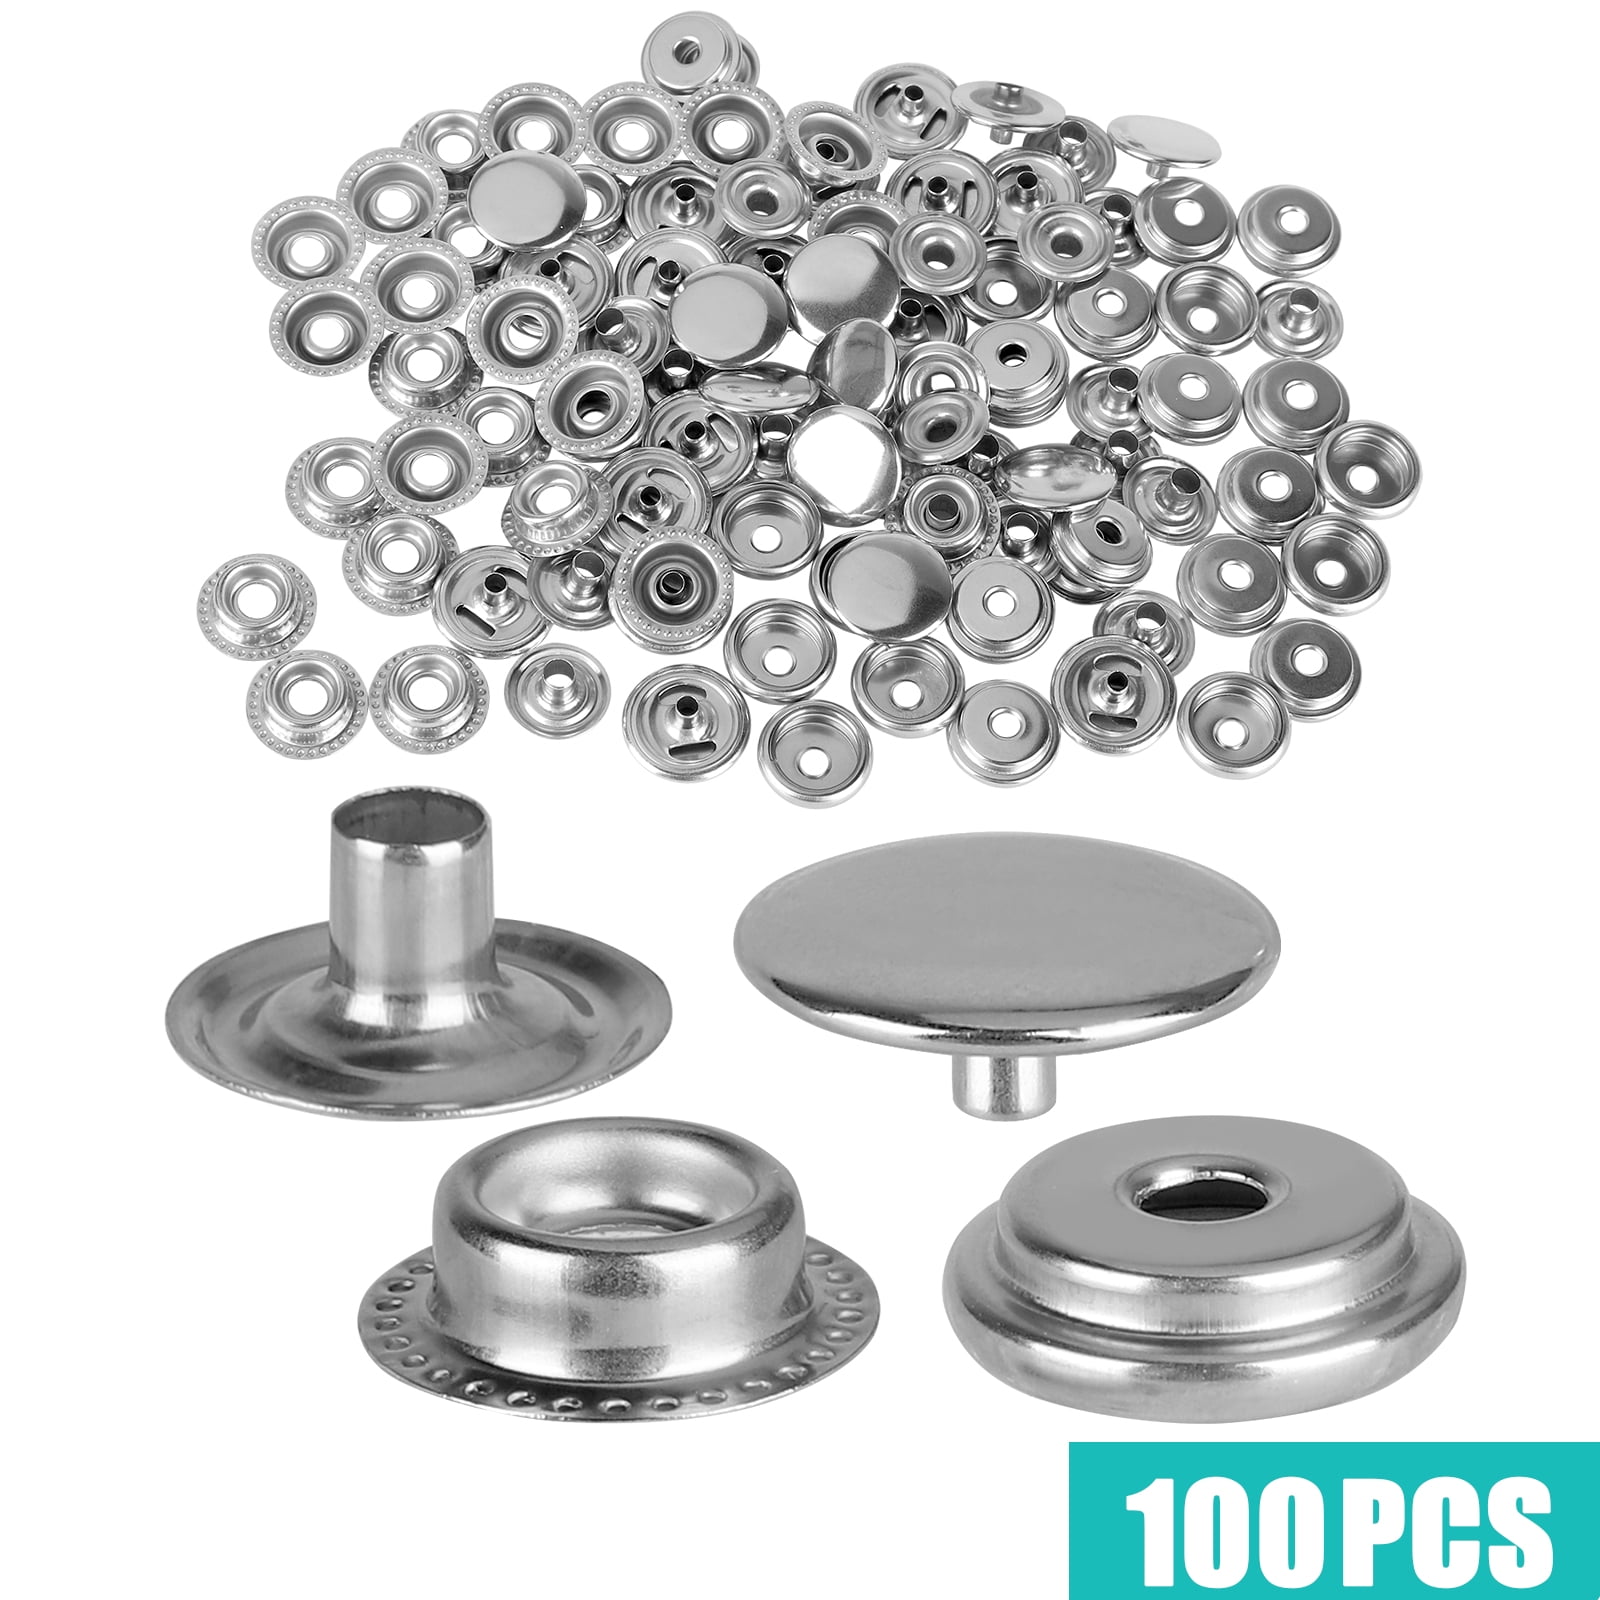 HOTBEST Fastener Screw Snaps Kit, High Grade Copper Material, Press Studs  Snap Fasteners Clothing Snaps Button For Bags, Jeans, Clothes, Fabric,  Leather Craft 